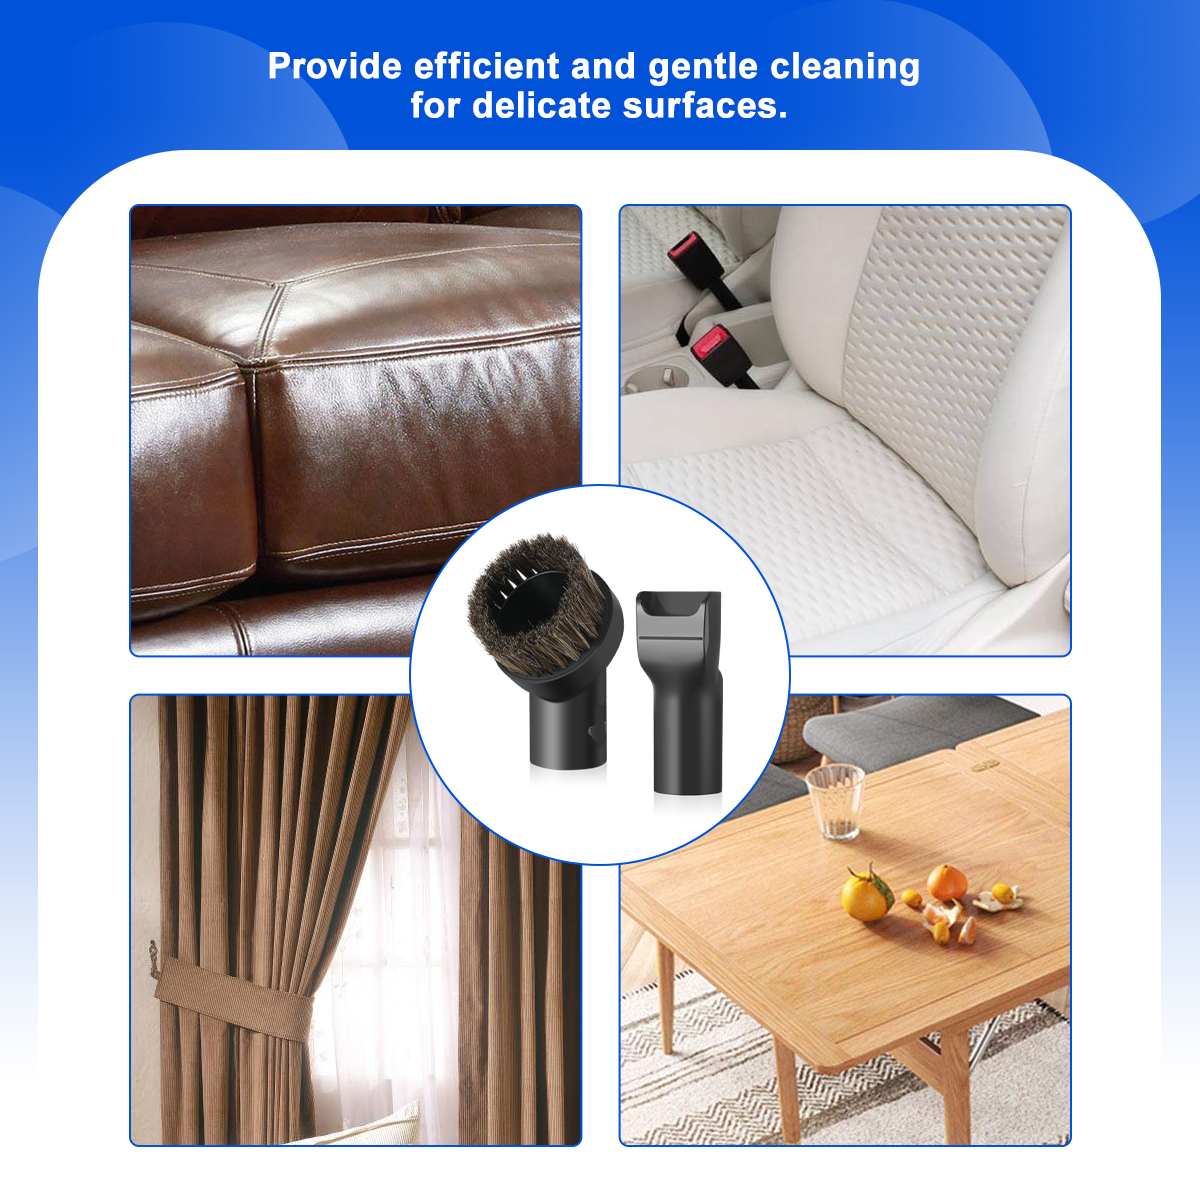 A vacuum cleaner with a horsehair brush can provide efficient and gentle cleaning for delicate surfaces.